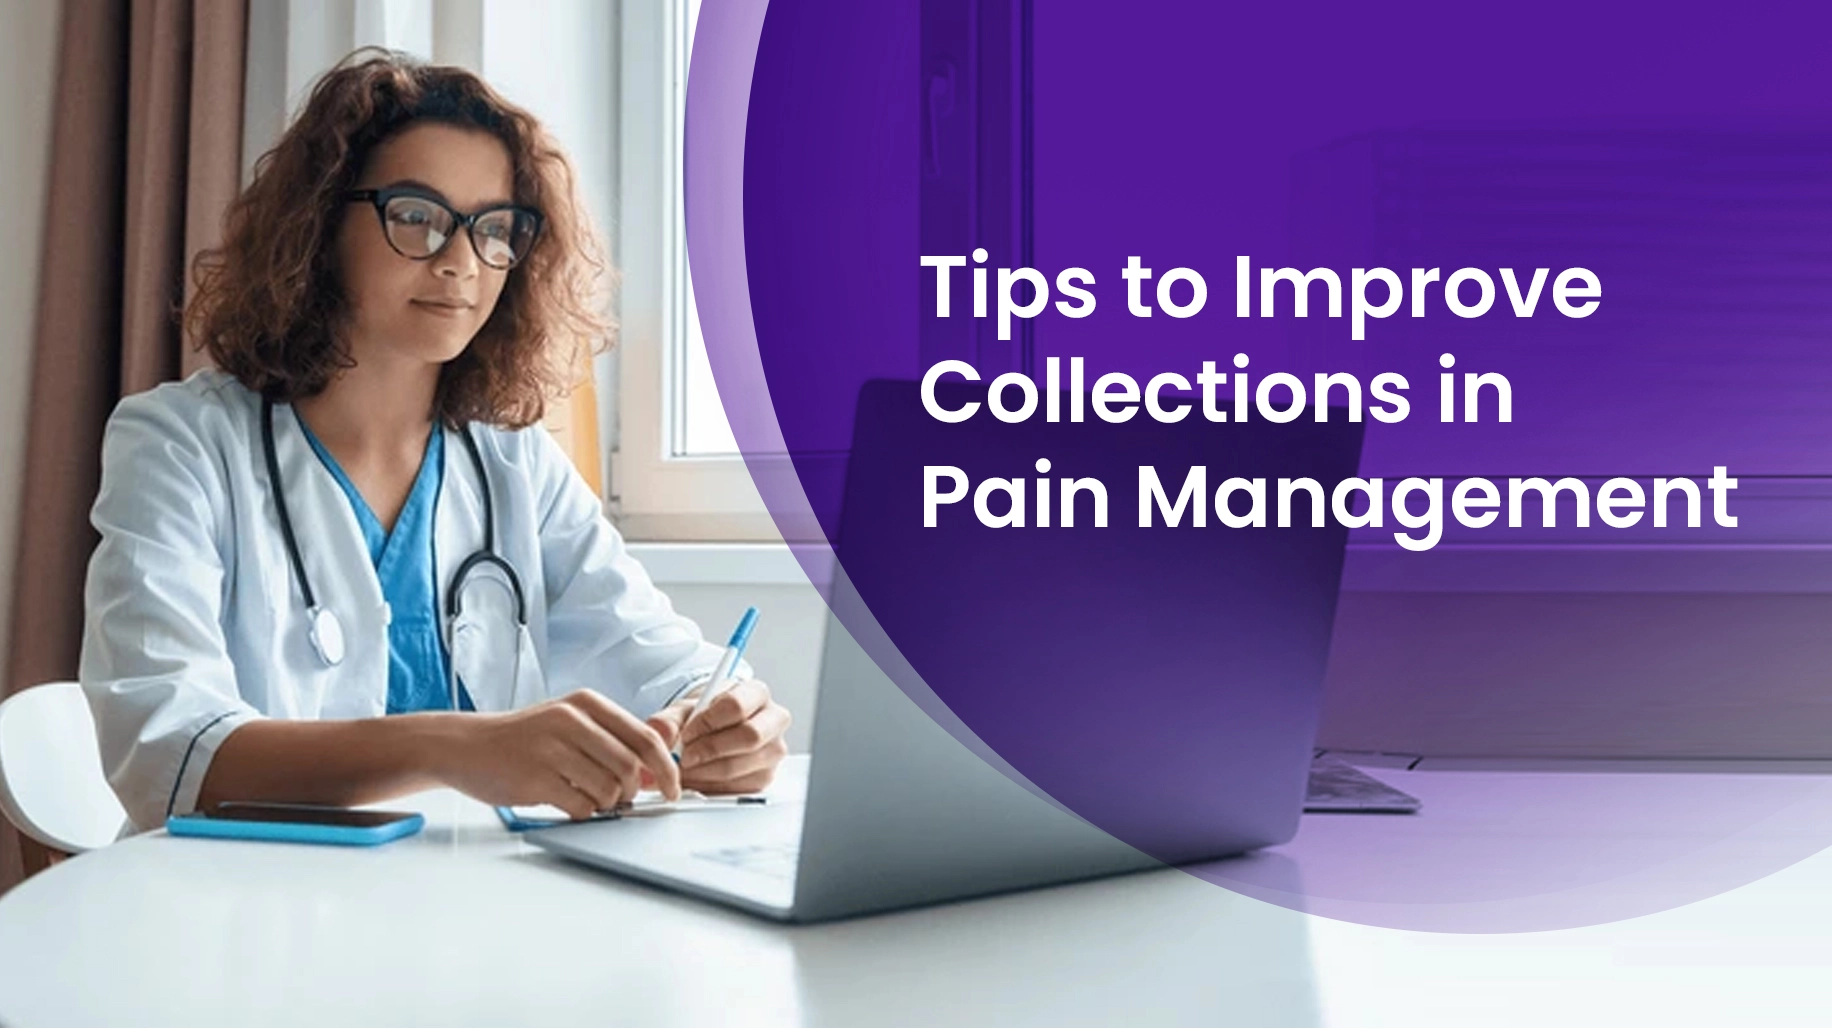 Improve Collections in Pain Management